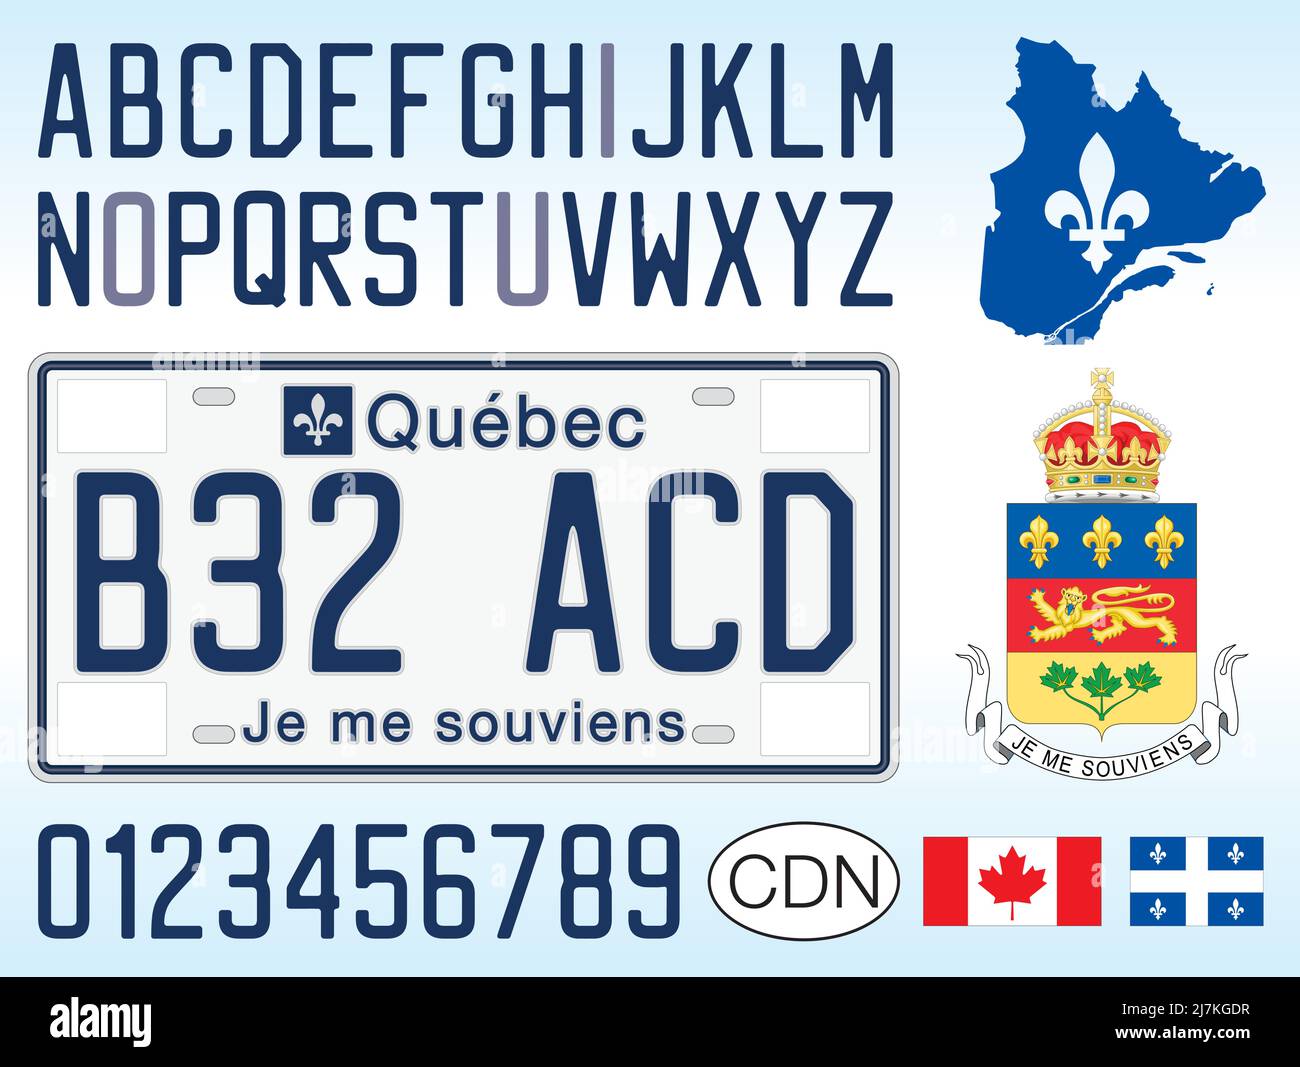 Quebec car license plate, Canada, letters, numbers and symbols, vector illustration Stock Vector